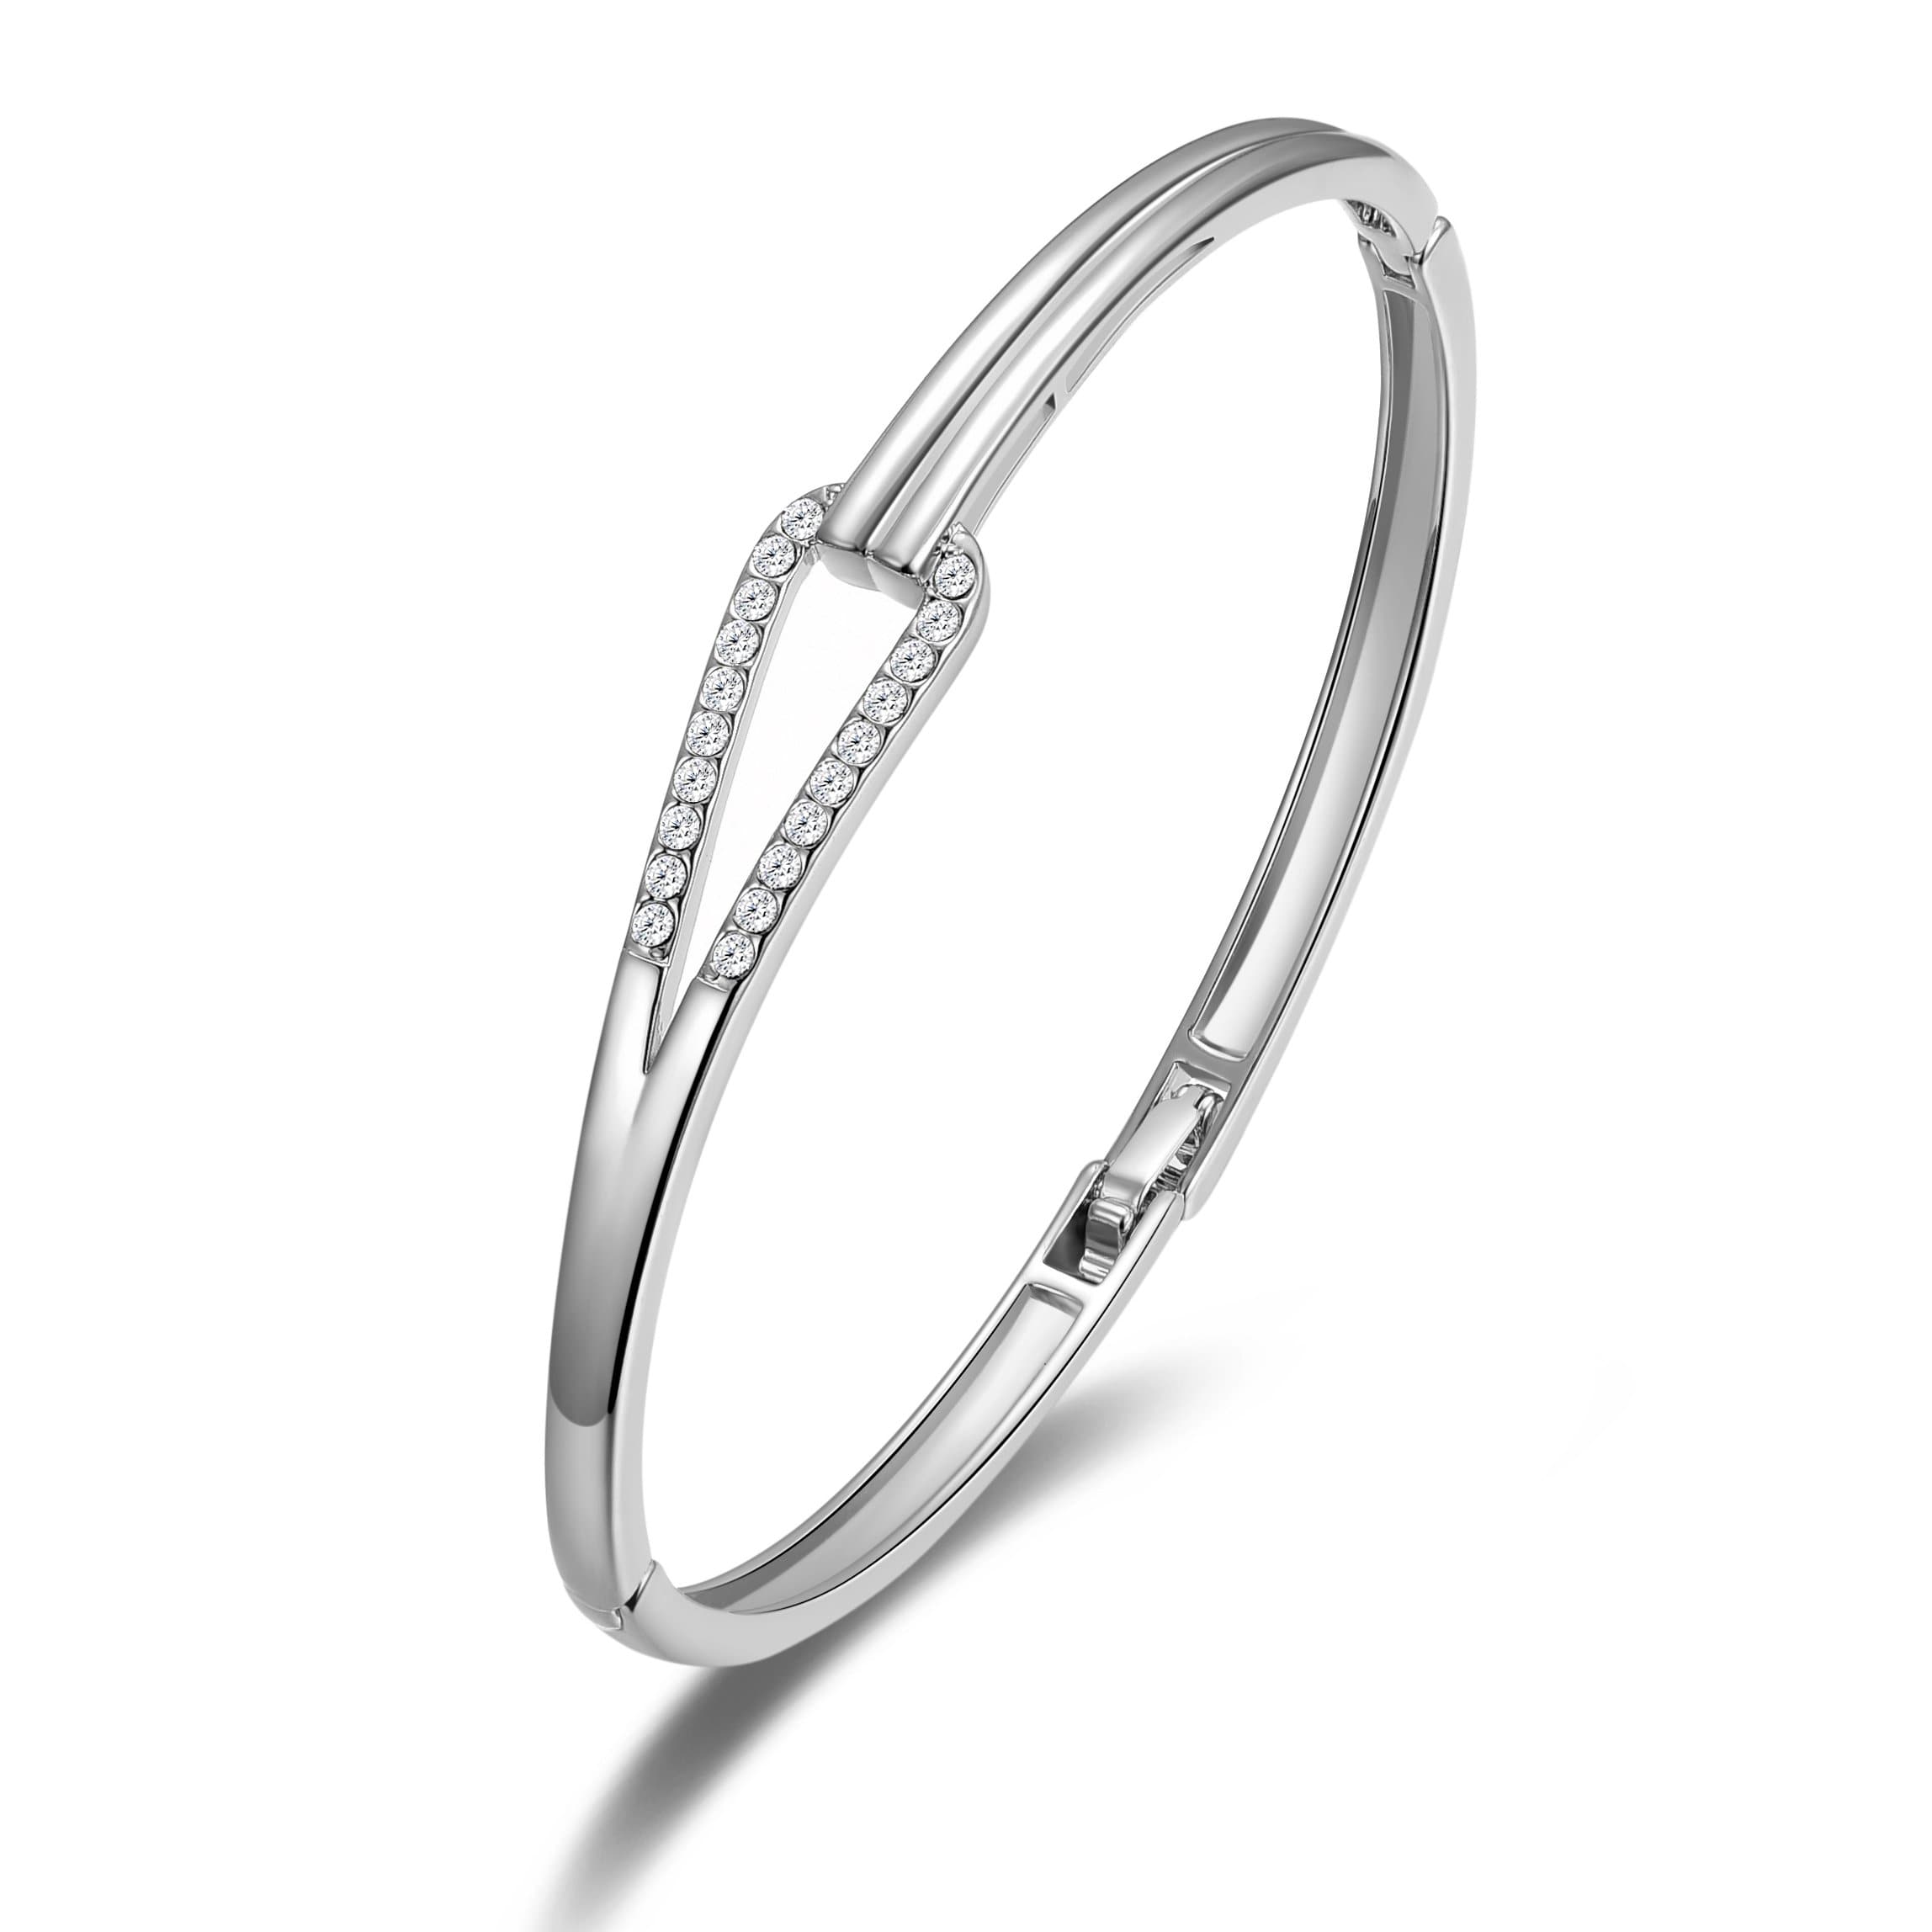 Silver Plated Link Bangle Created with Zircondia® Crystals by Philip Jones Jewellery